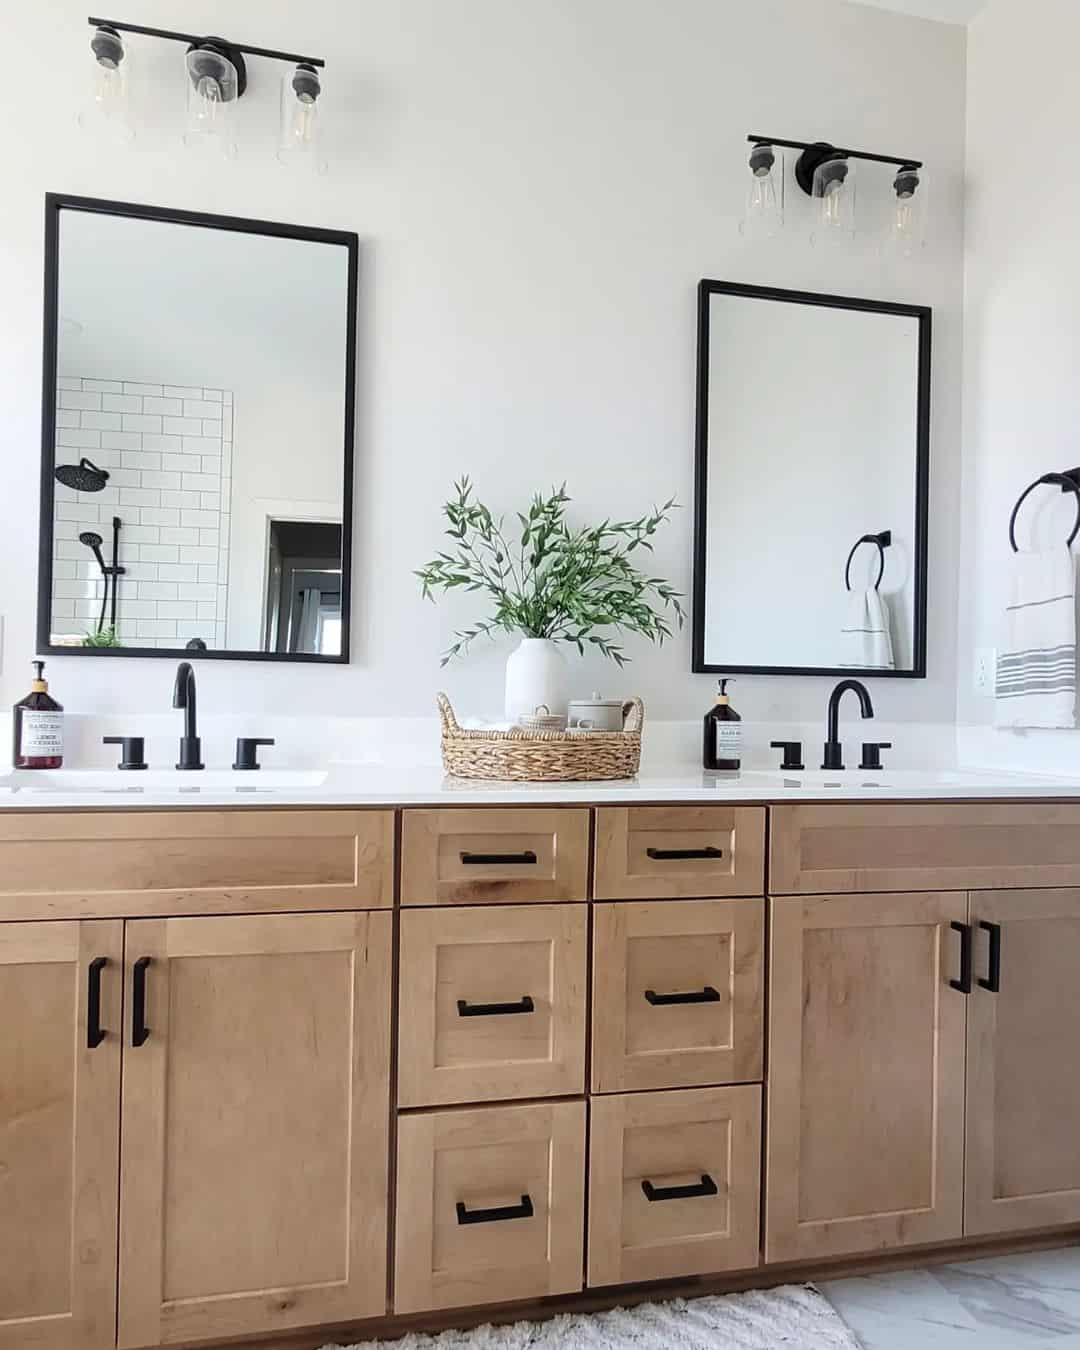 Bathroom Lighting Ideas Over Mirror with Black Accents - Soul & Lane